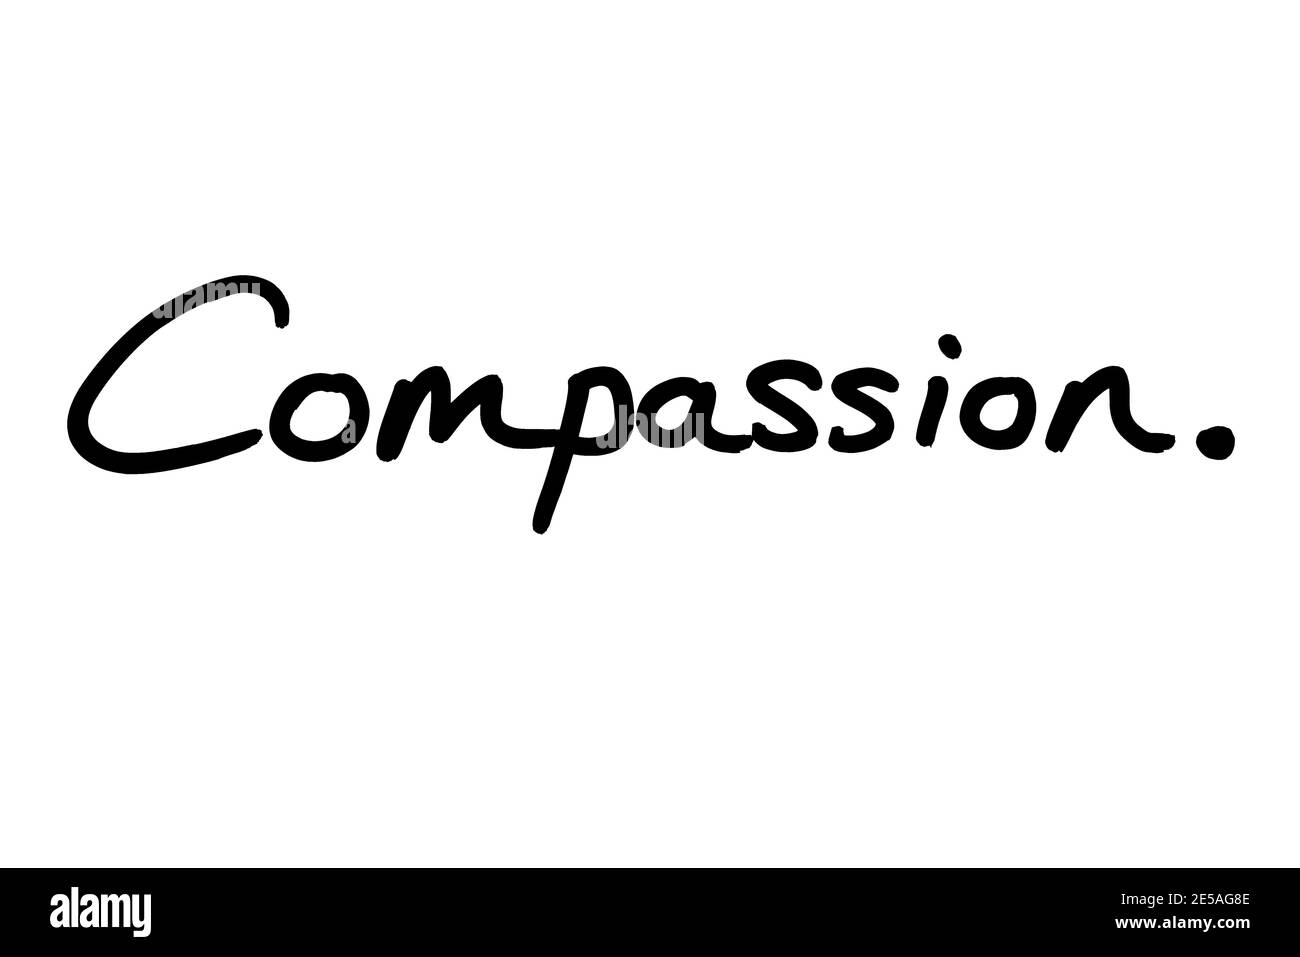 The word Compassion, handwritten on a white background. Stock Photo